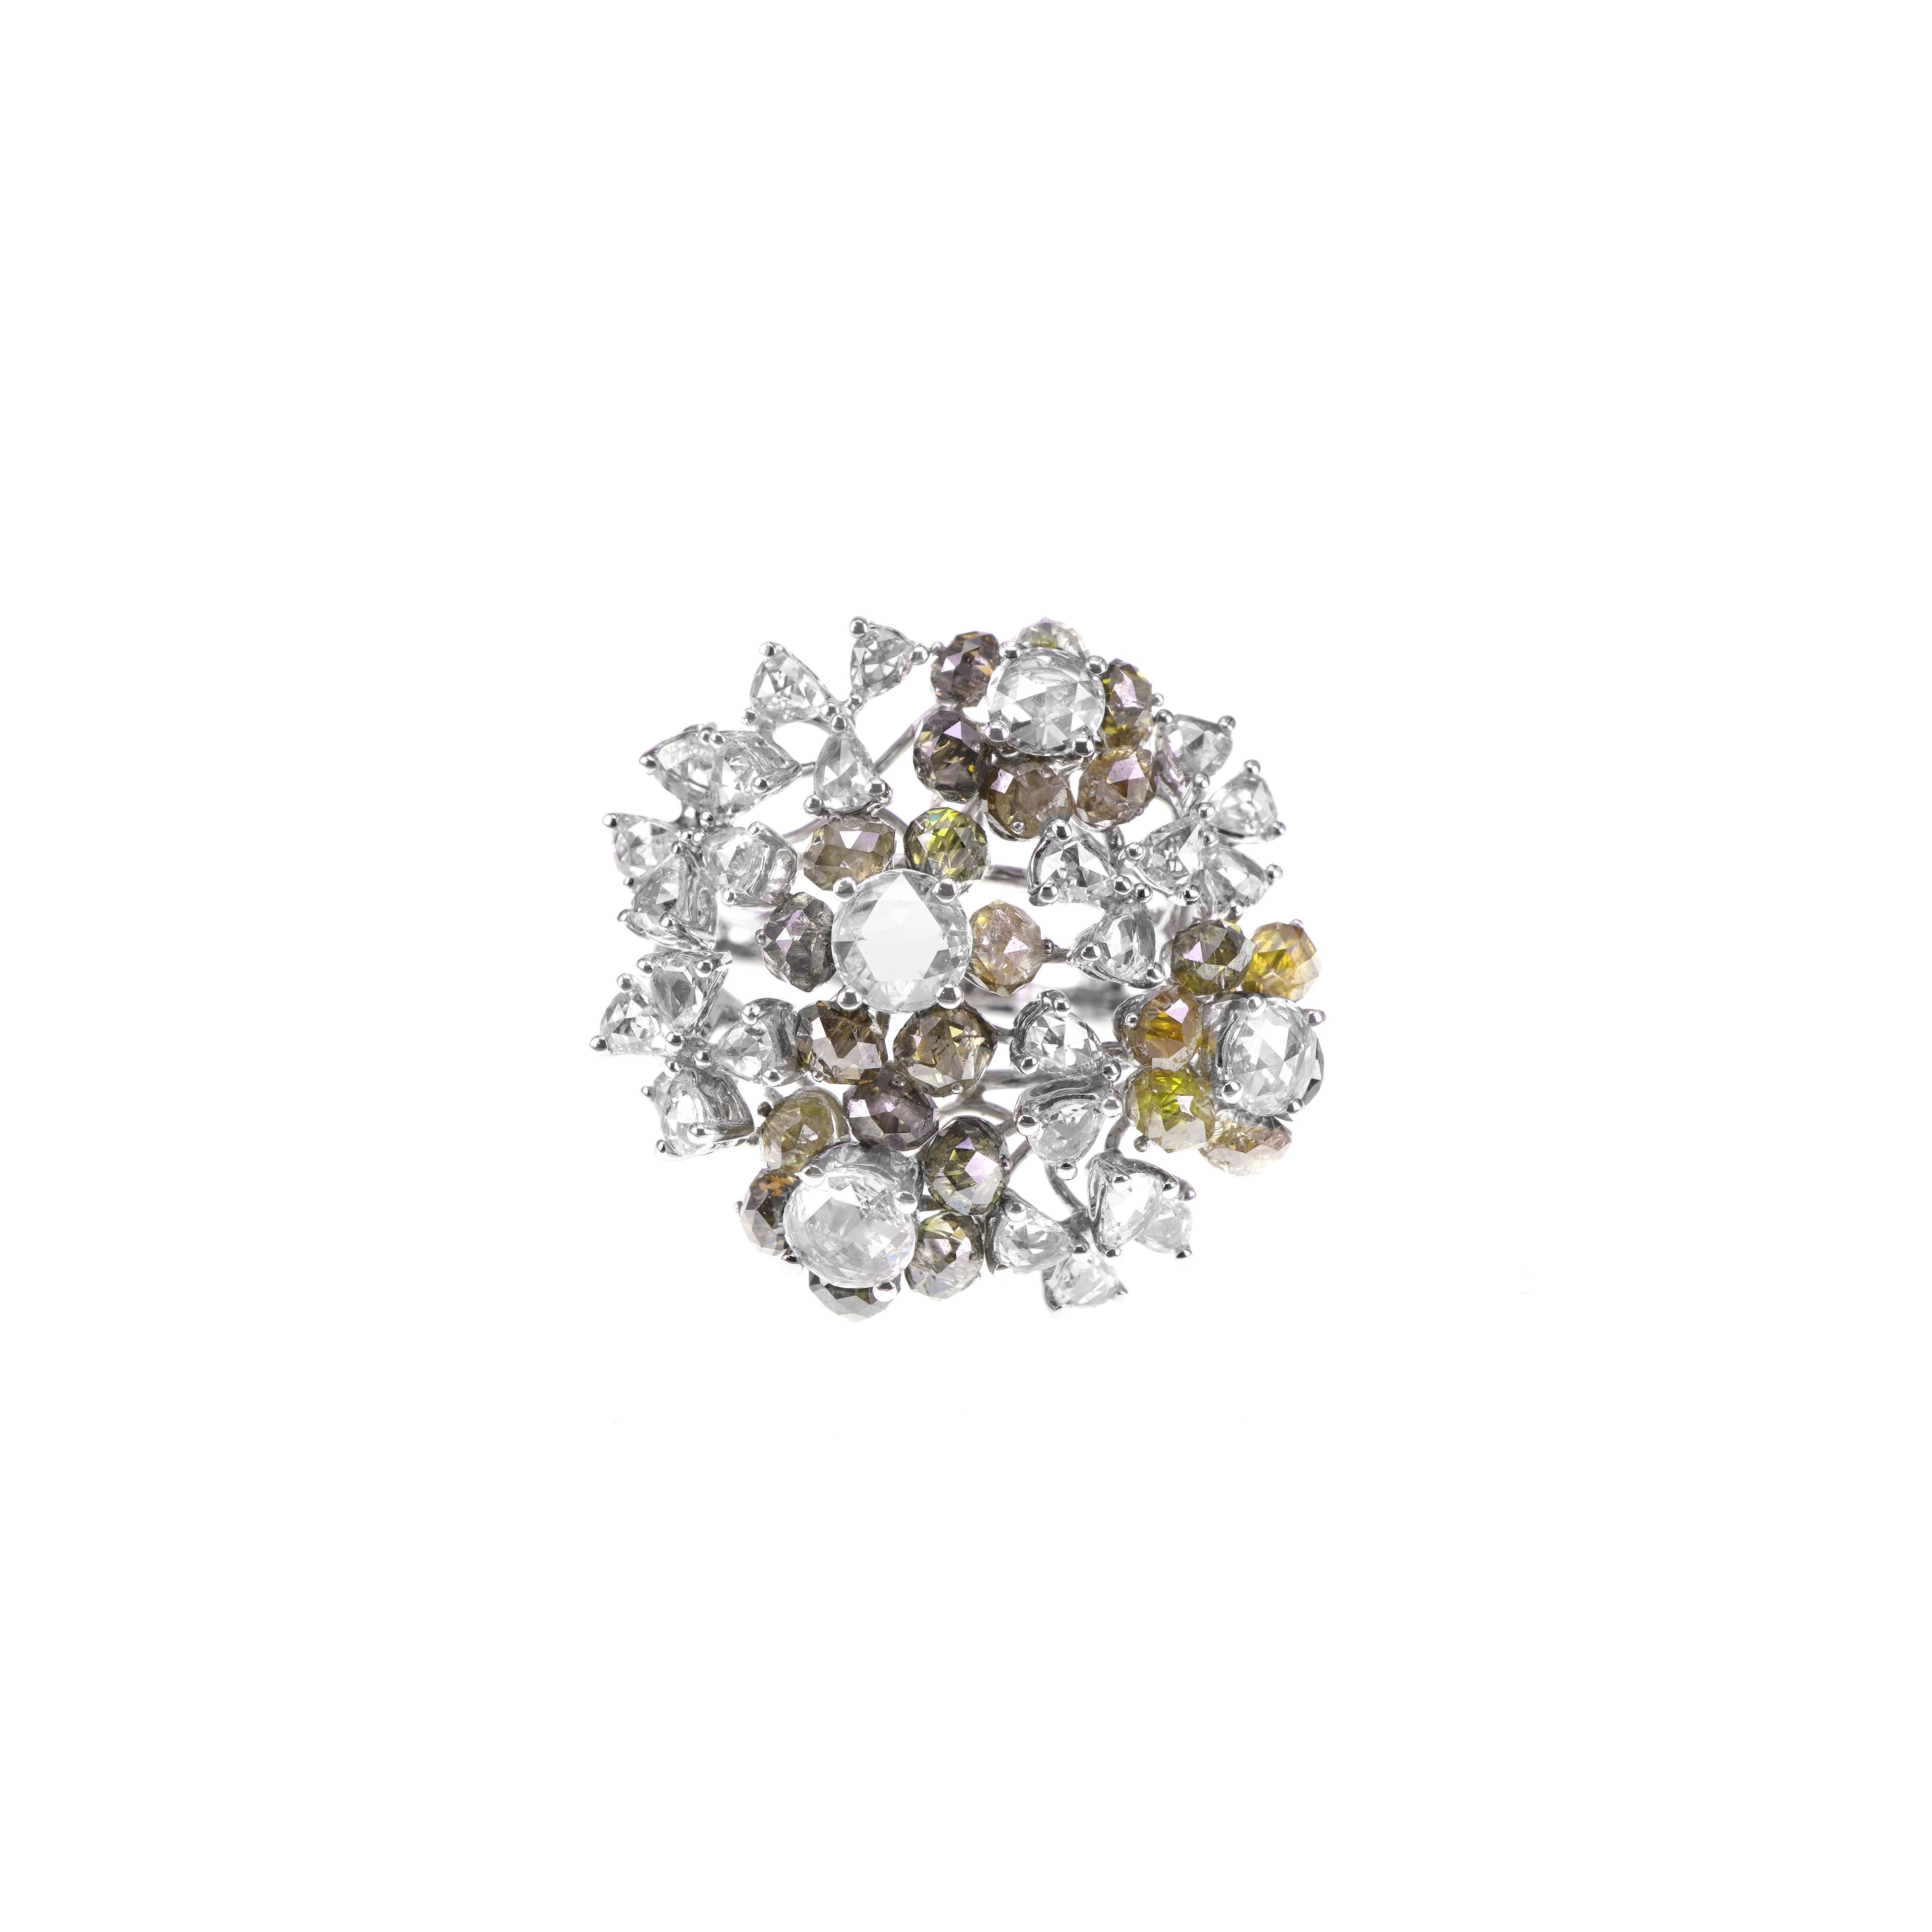 In this quirky ring, 4.31 carat of green diamond beads are set with 1.90 carat of white brilliant diamond and white European old cuts. The ring is made in 18 K gold and has been hand made in Hong Kong. 
The details of the ring are mentioned